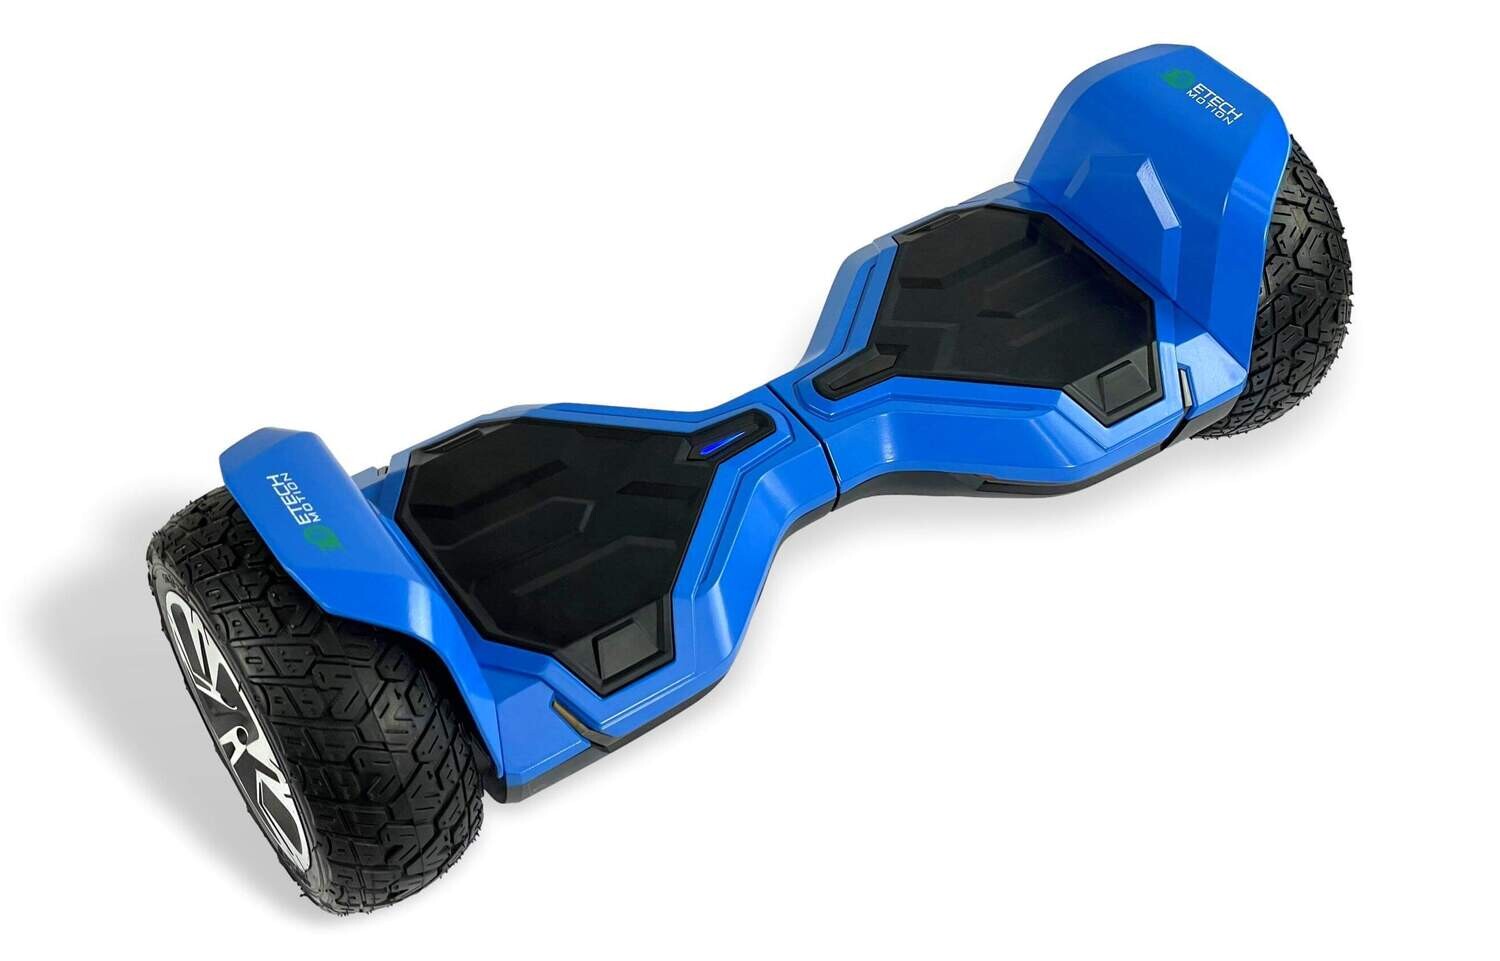 Blue G2 WARRIOR PRO All Terrain Hoverboard 8.5" Segway